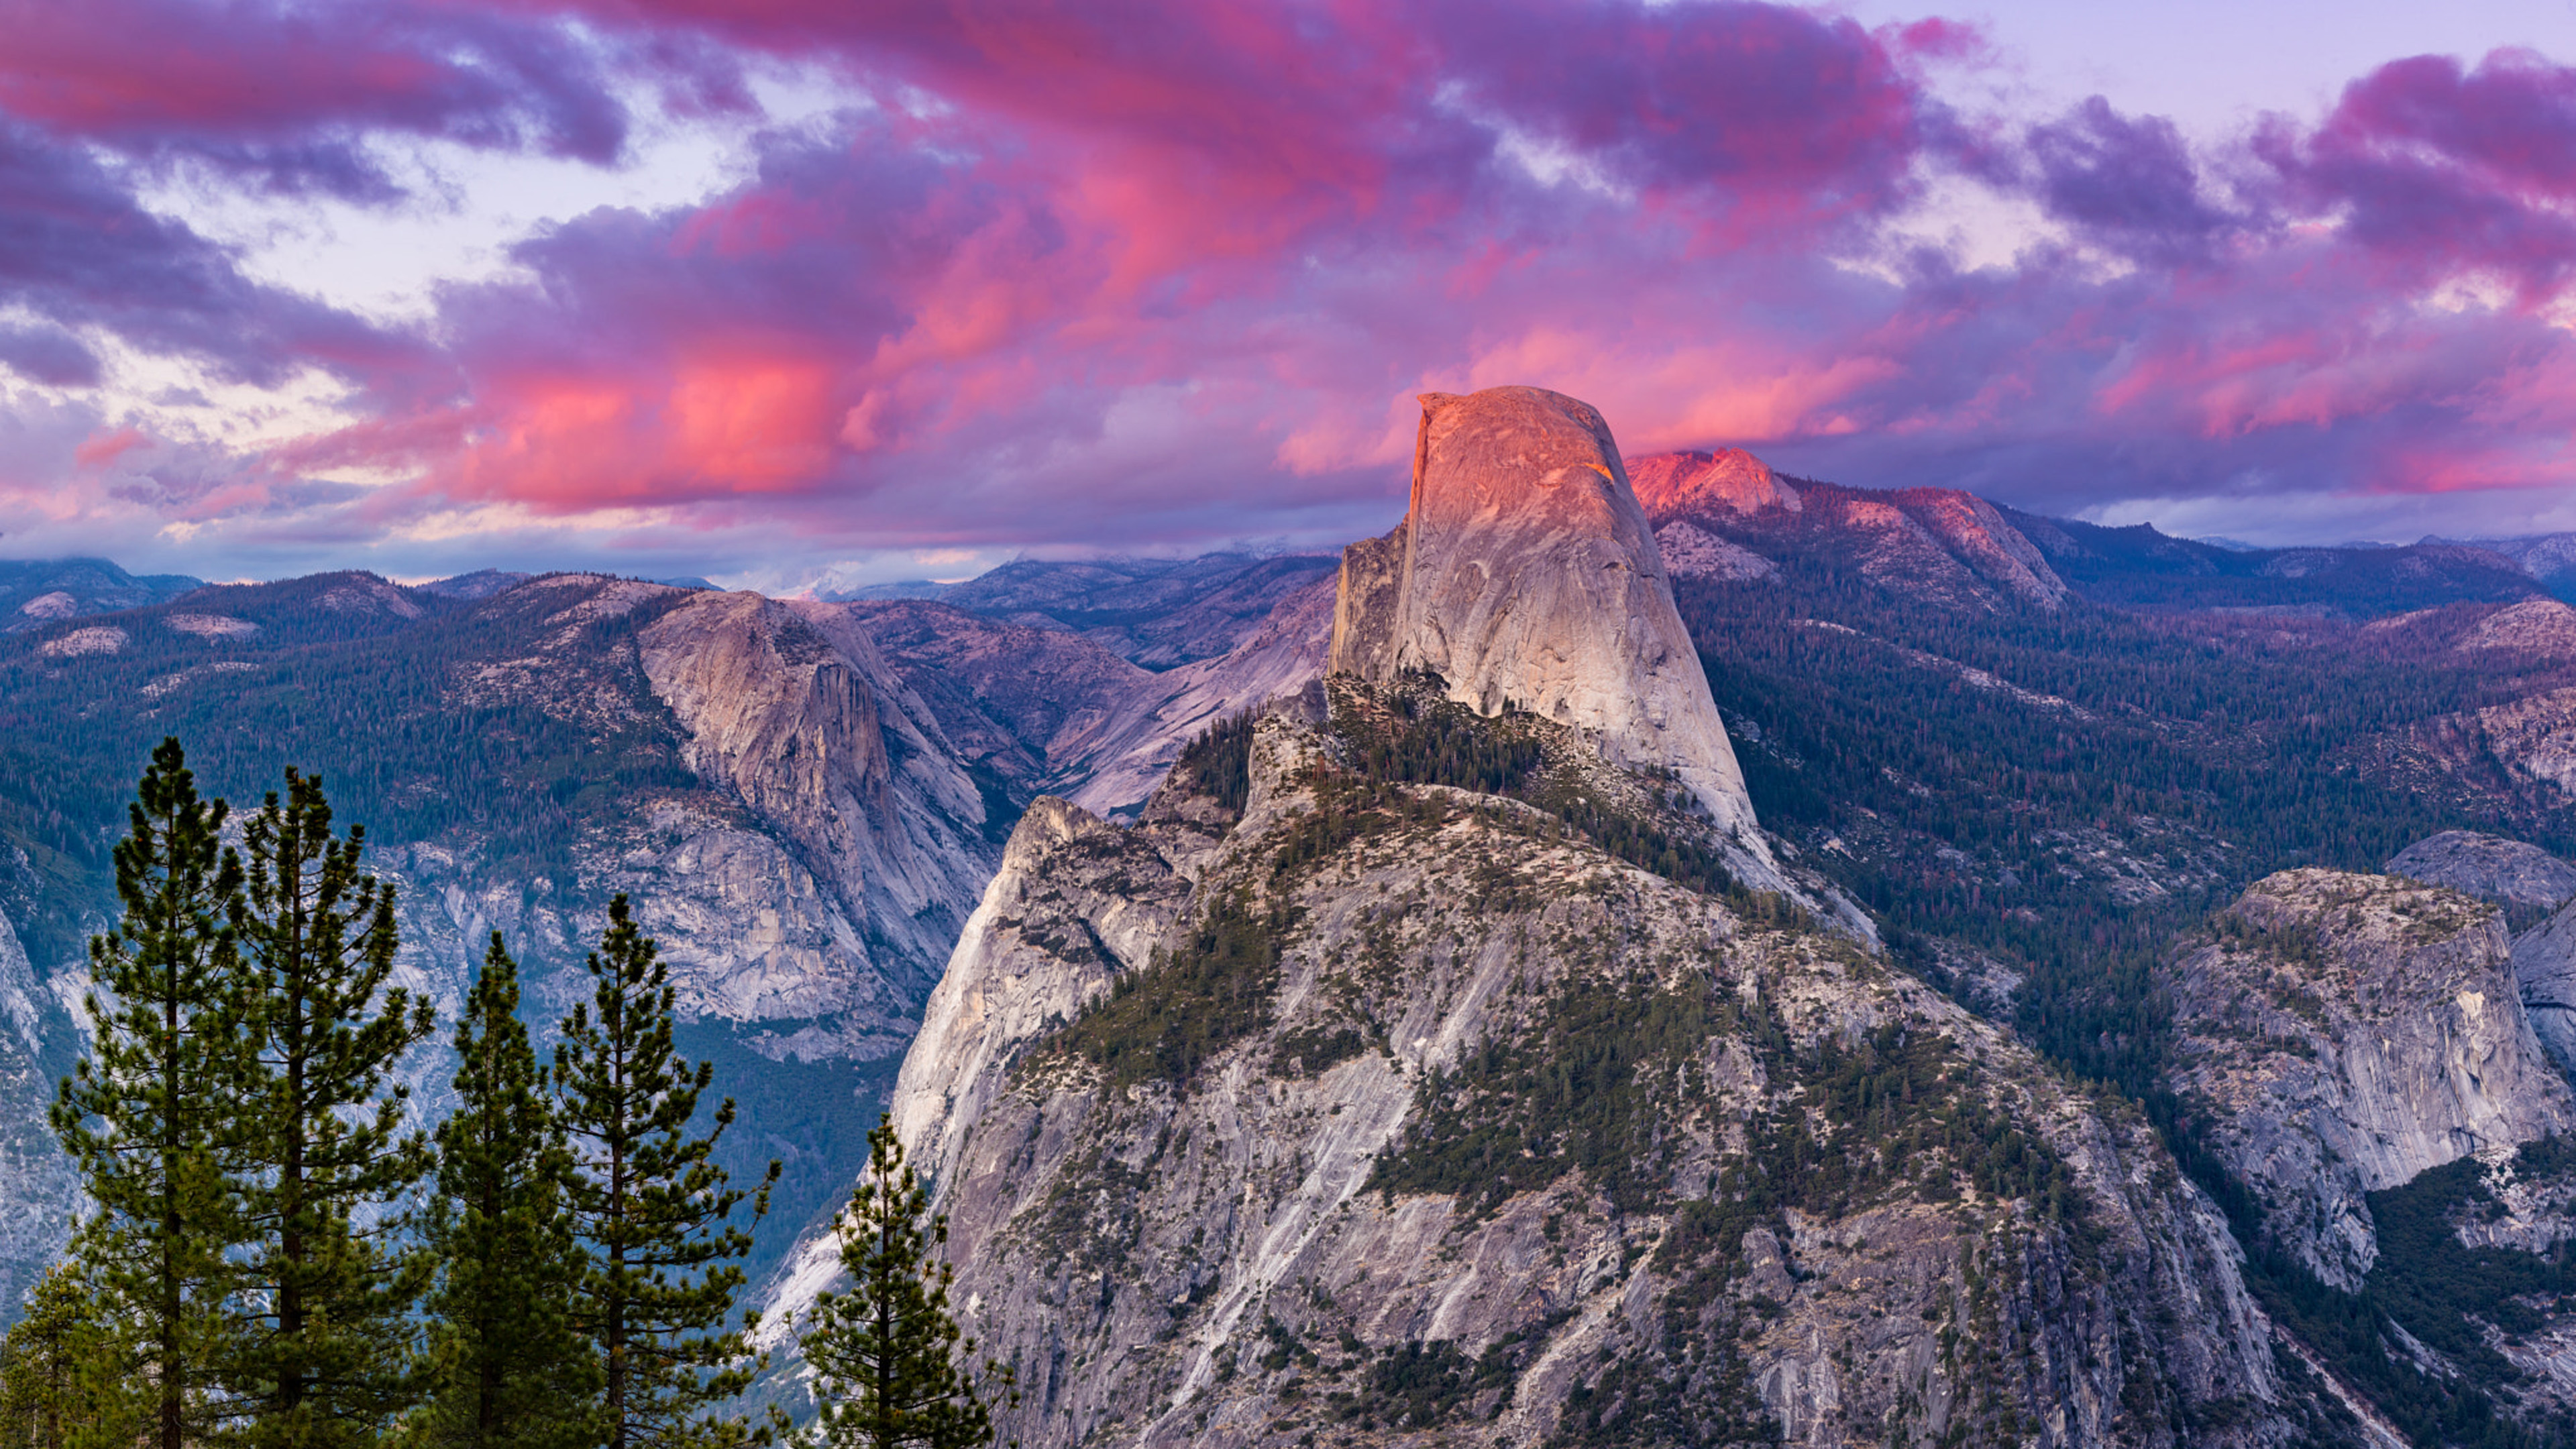 Half Dome Granite Dome In California Yosemite National Park Usa Best Hd  Wallpapers For Desktop Tablets And Mobile Phones3840x2160 : 